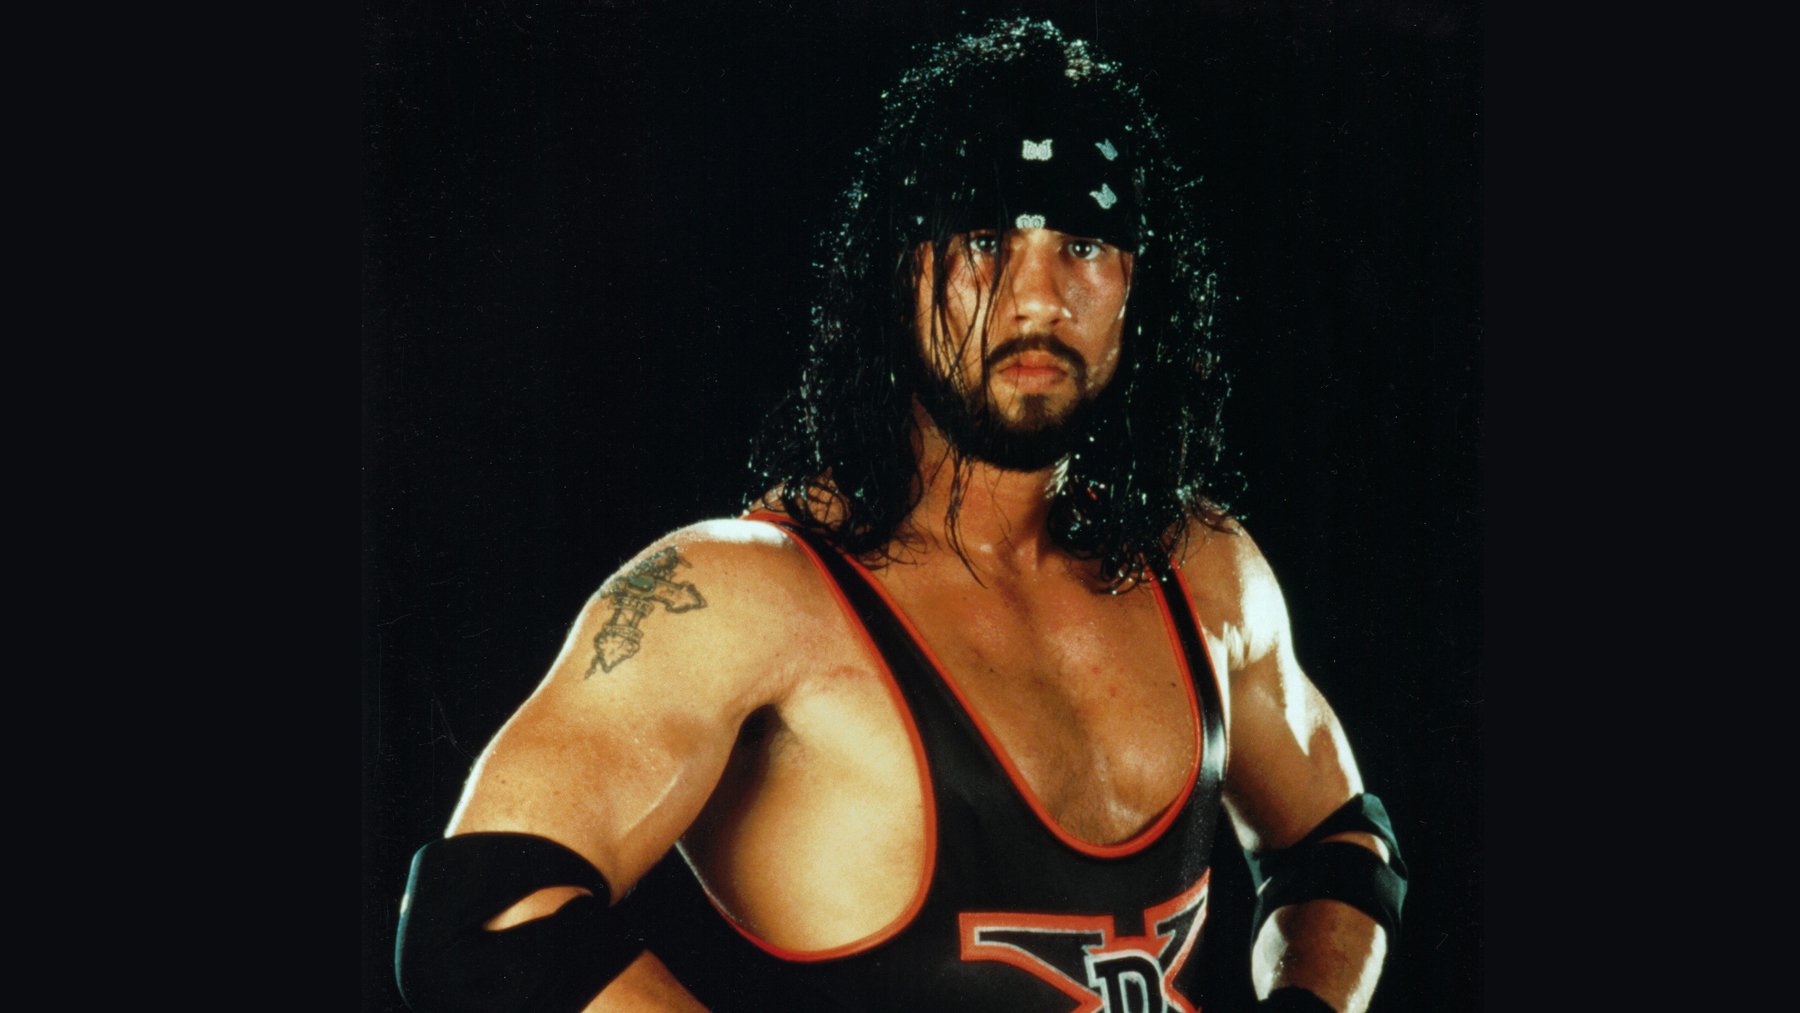 barbara cooksey recommends Sean Waltman Sex Tape